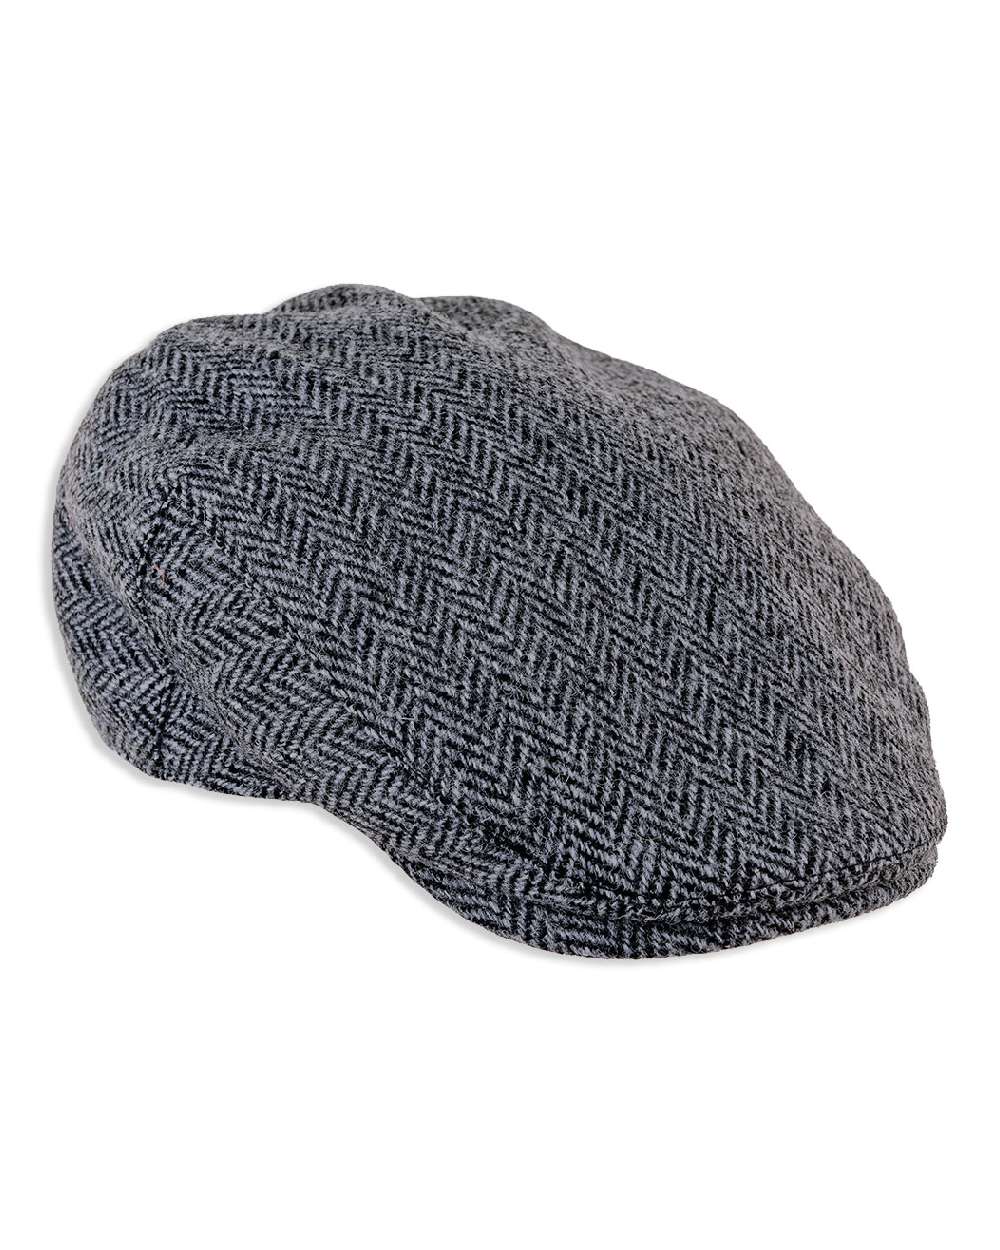 SAGE Fly Fishing Graphite Gray Beanie Hat Cotton Wool Blend One